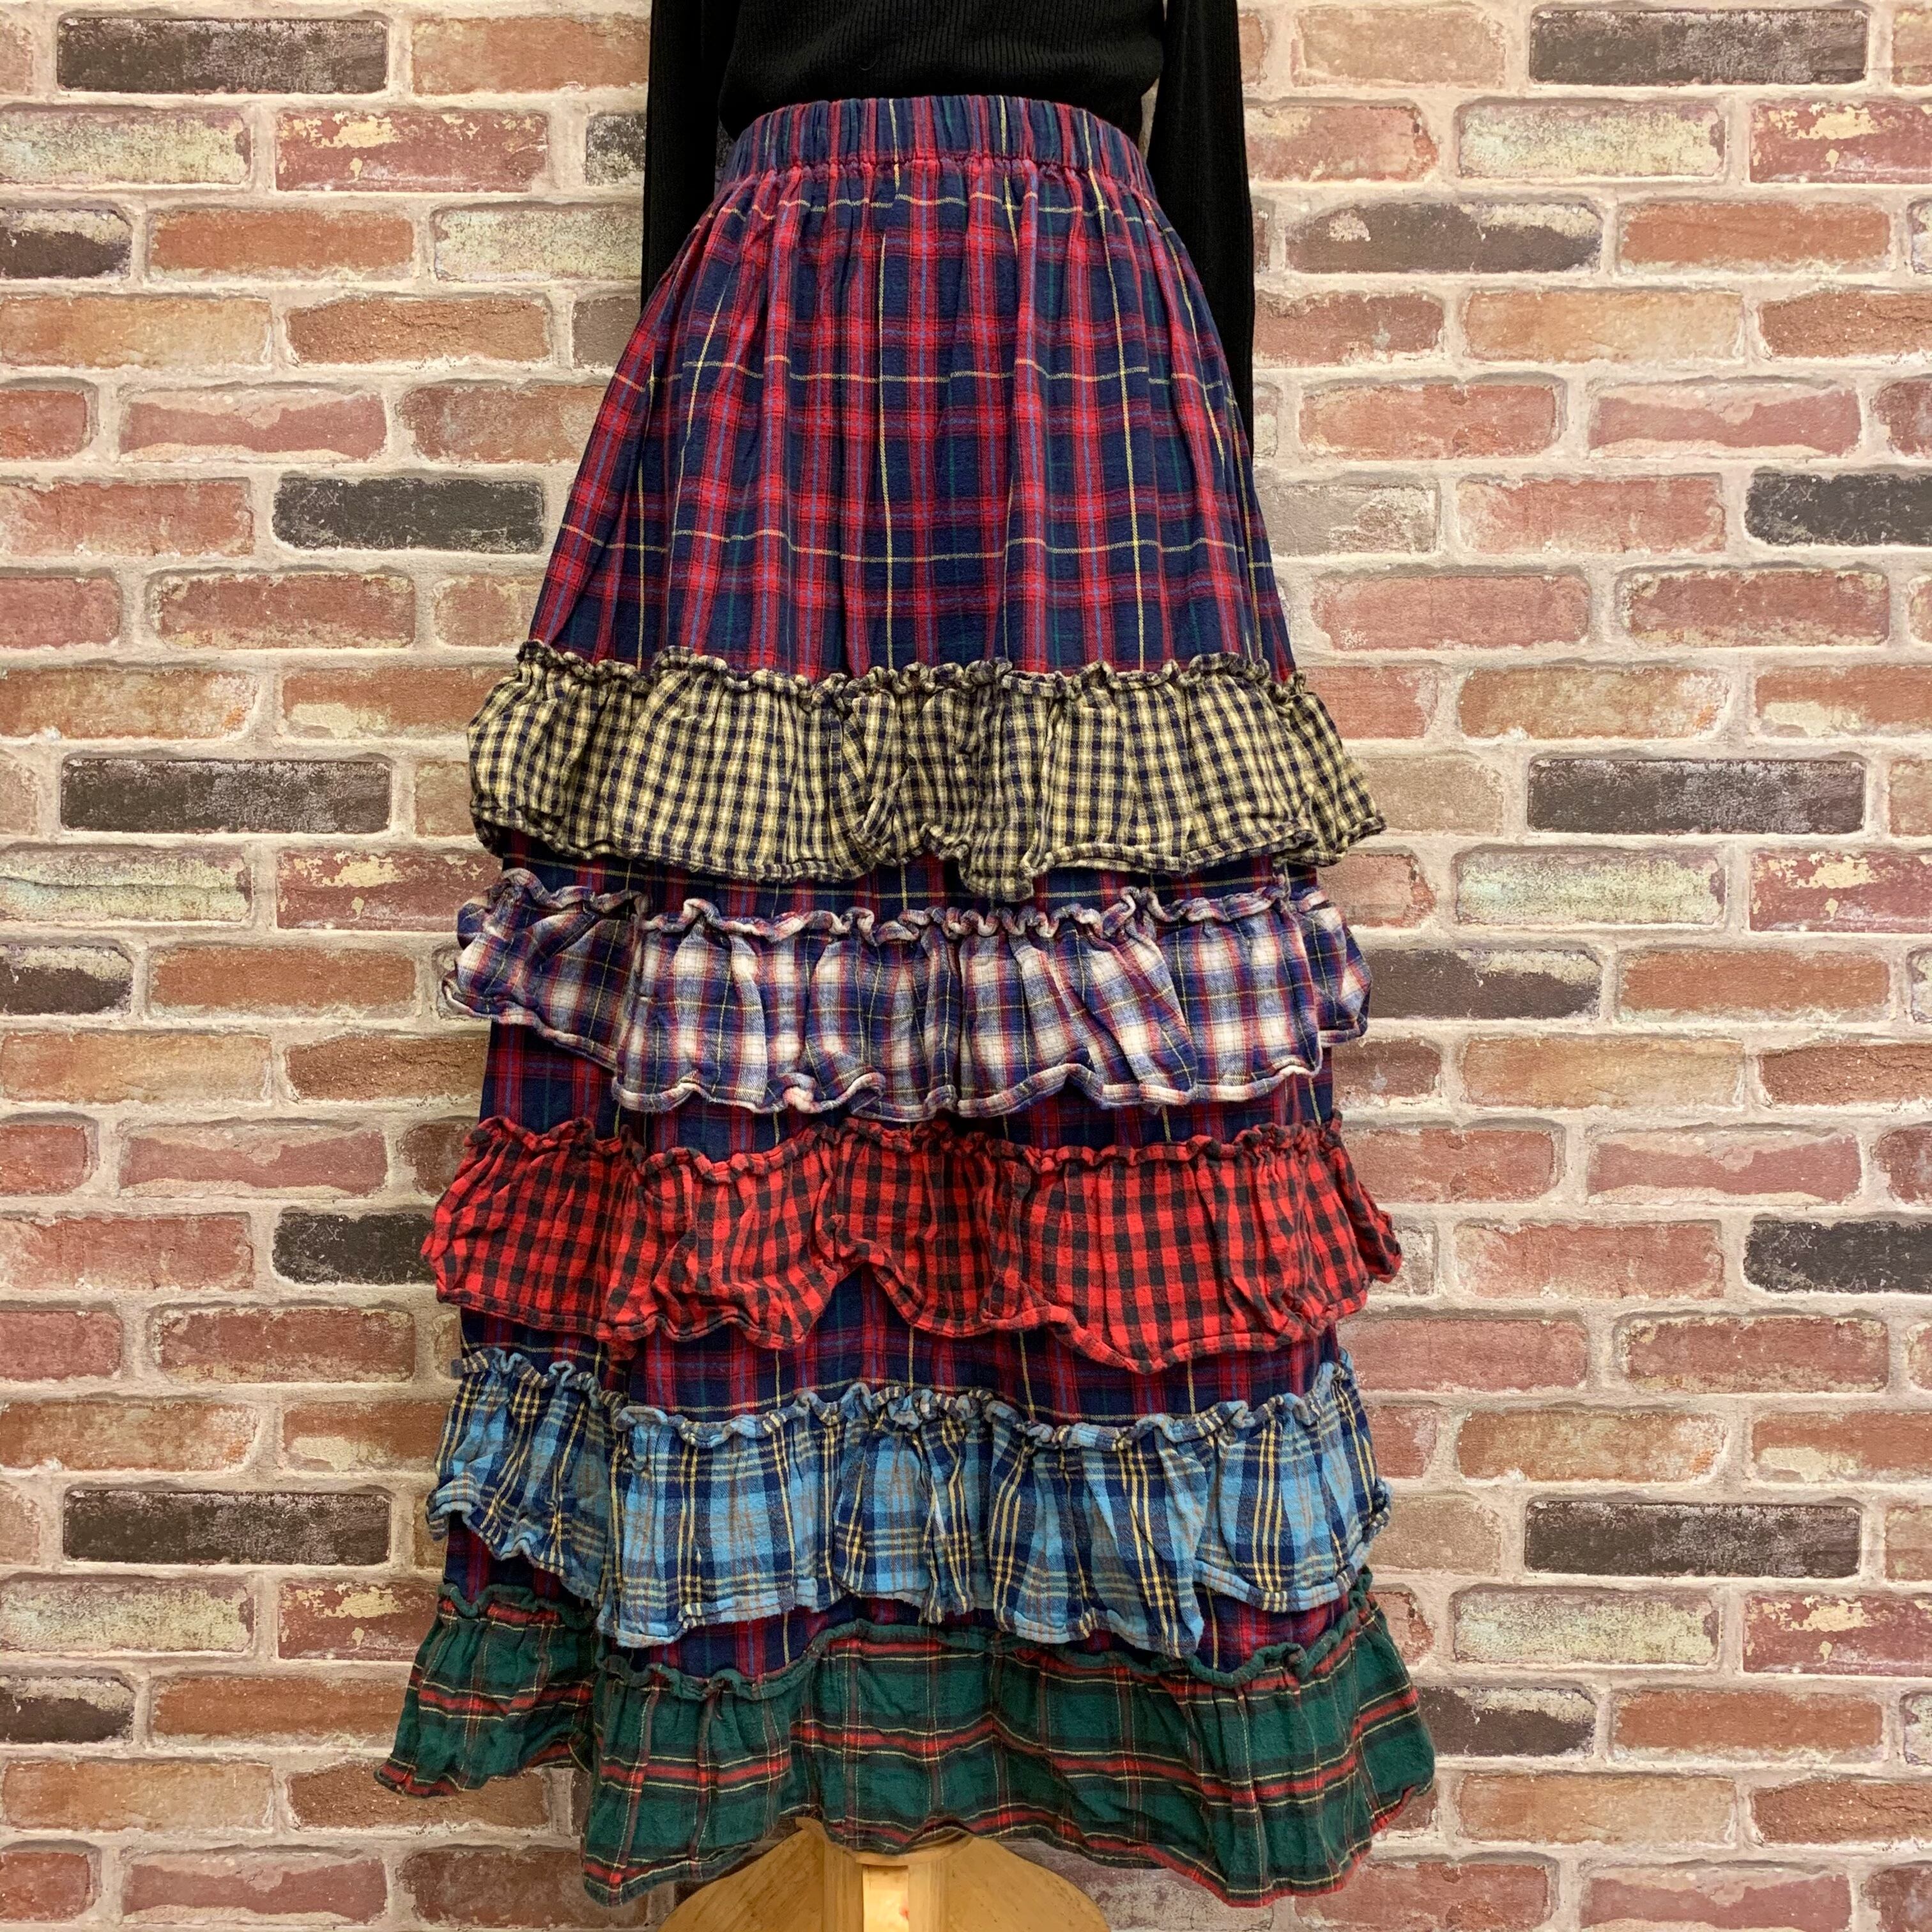 MADE IN U.S.A Check Colorful Skirt